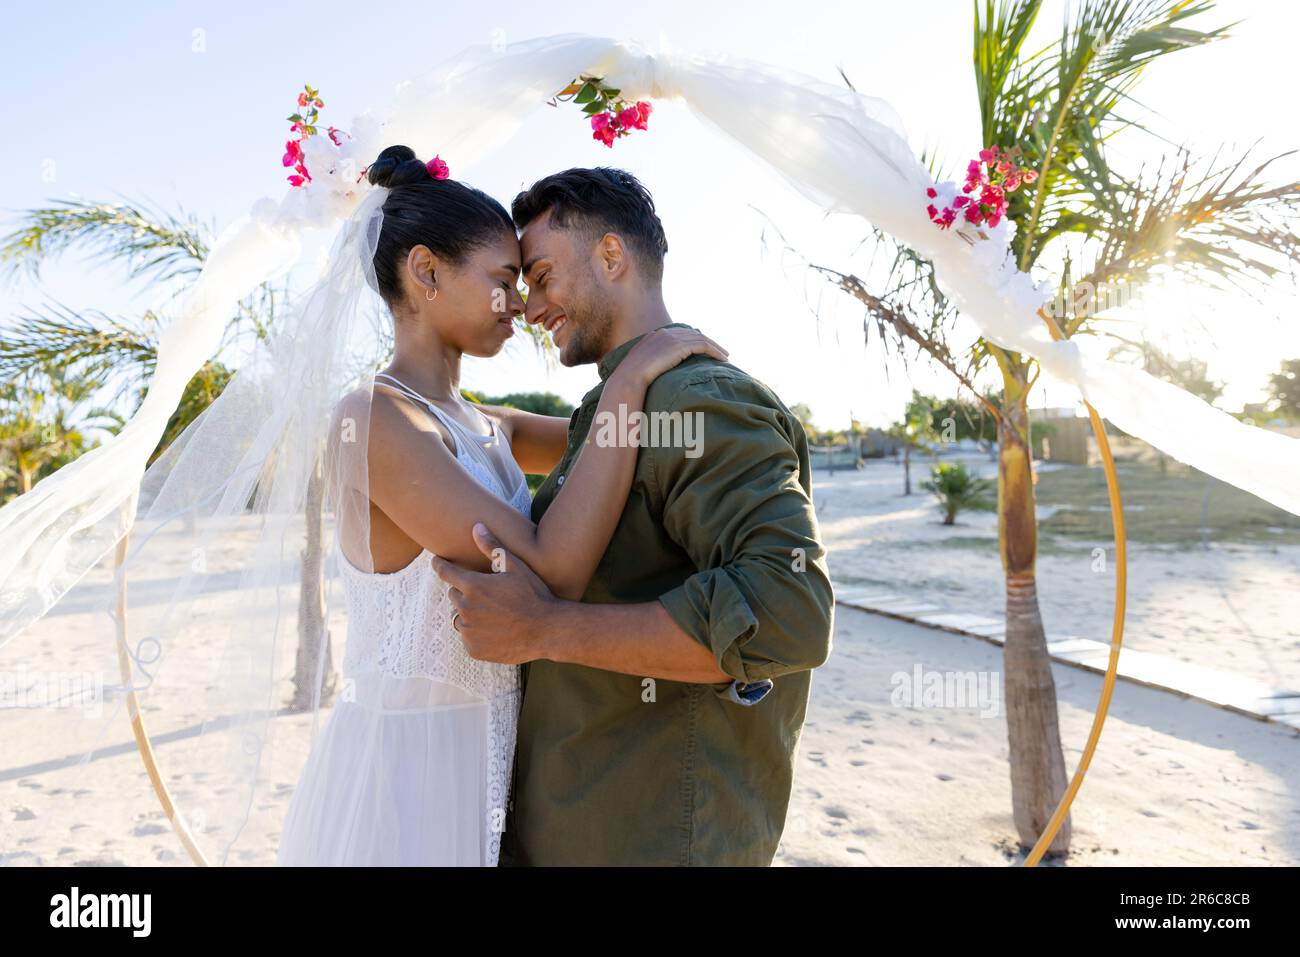 Side view of young romantic wedding couple holding face to face outdoors  Stock Photo - Alamy